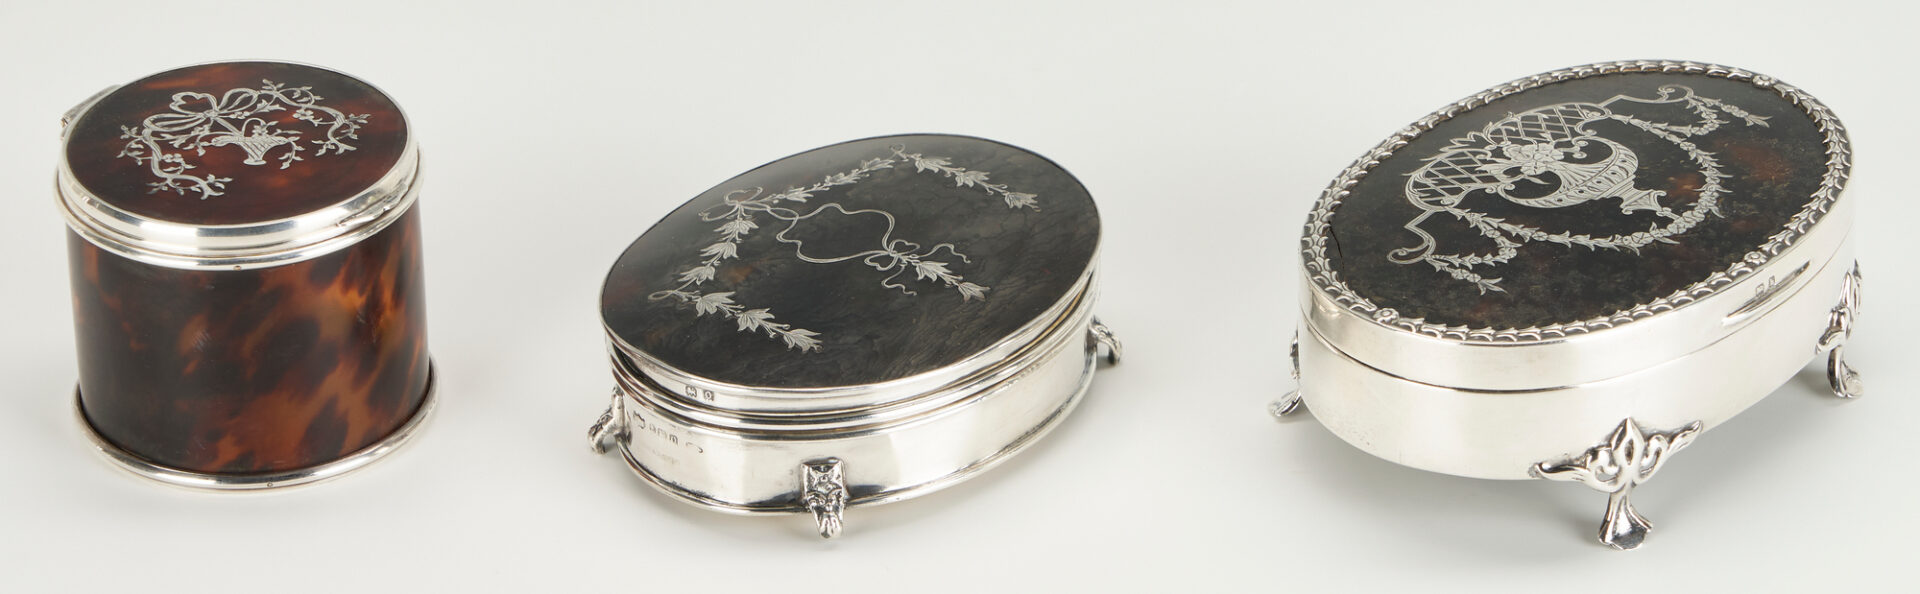 Lot 108: 3 Small George IV Tortoiseshell Boxes with Sterling Mounts & Inlay